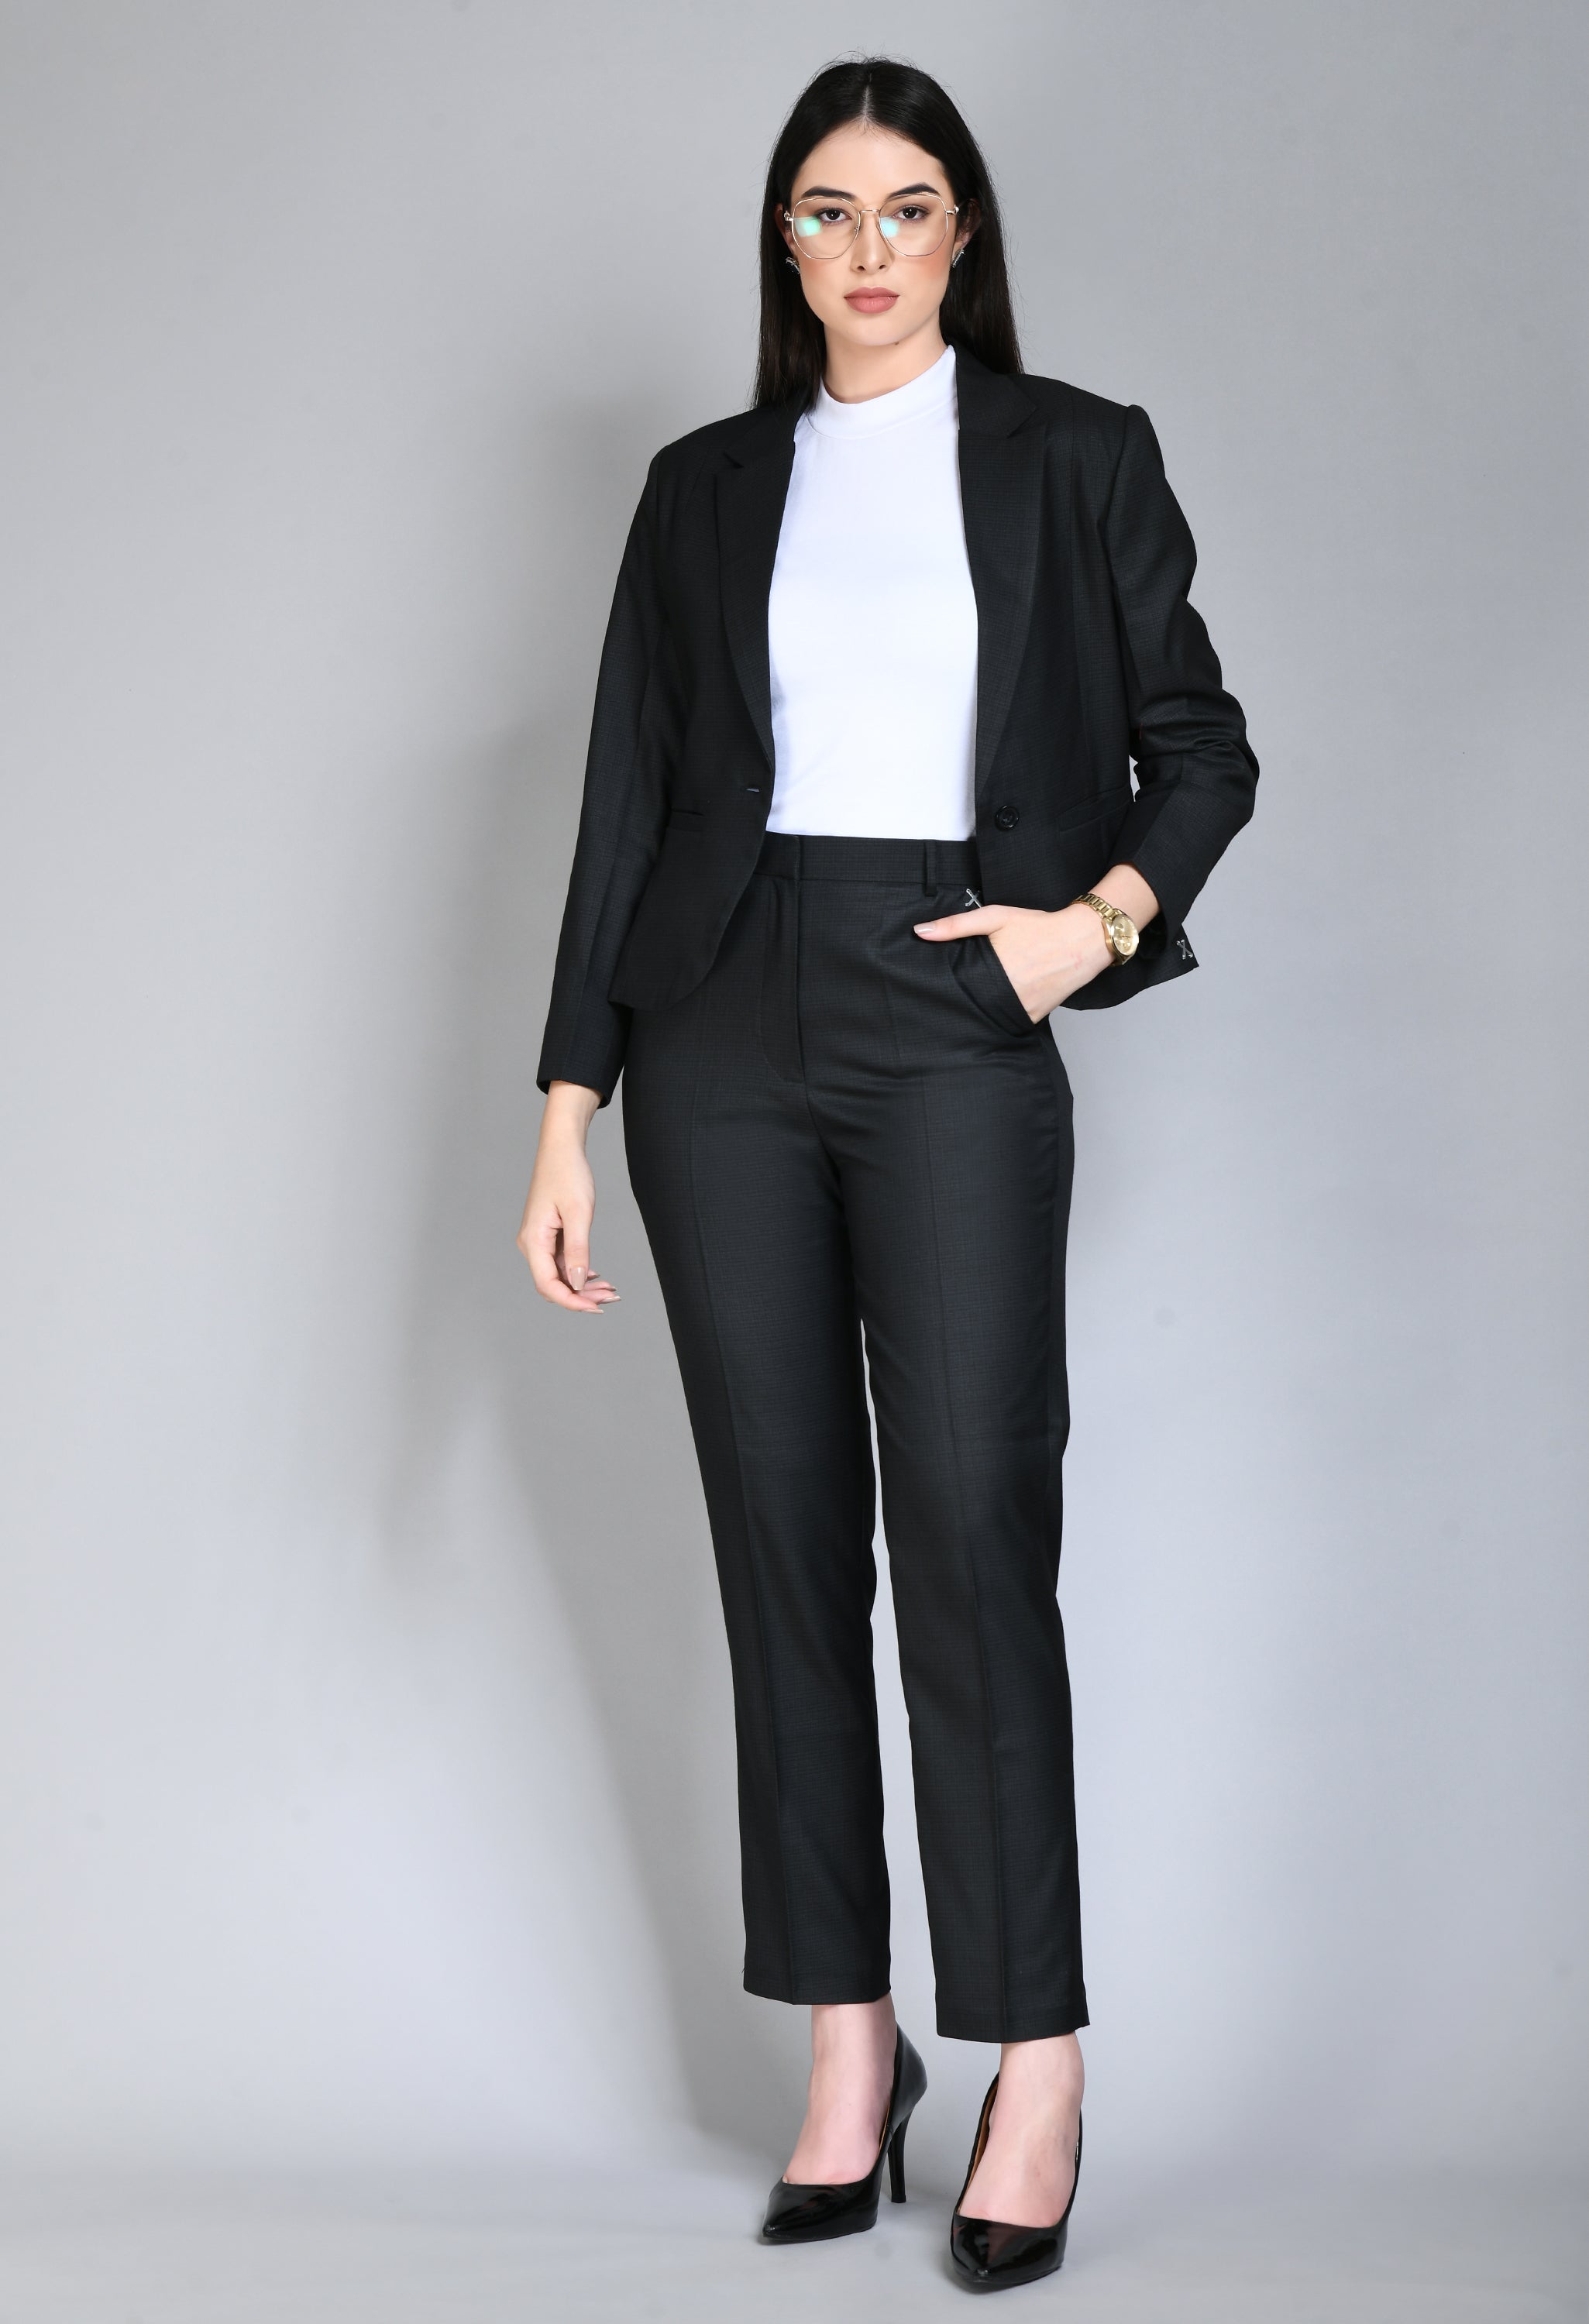 Long-sleeved Two-piece Suit, Women's Suit, Blazer and Pants, Suit for Women,  Suit for Ladies, Office Wear, Pink Blazer Suits, Formal Outfits - Etsy |  Pantsuits for women, Suits for women, Woman suit